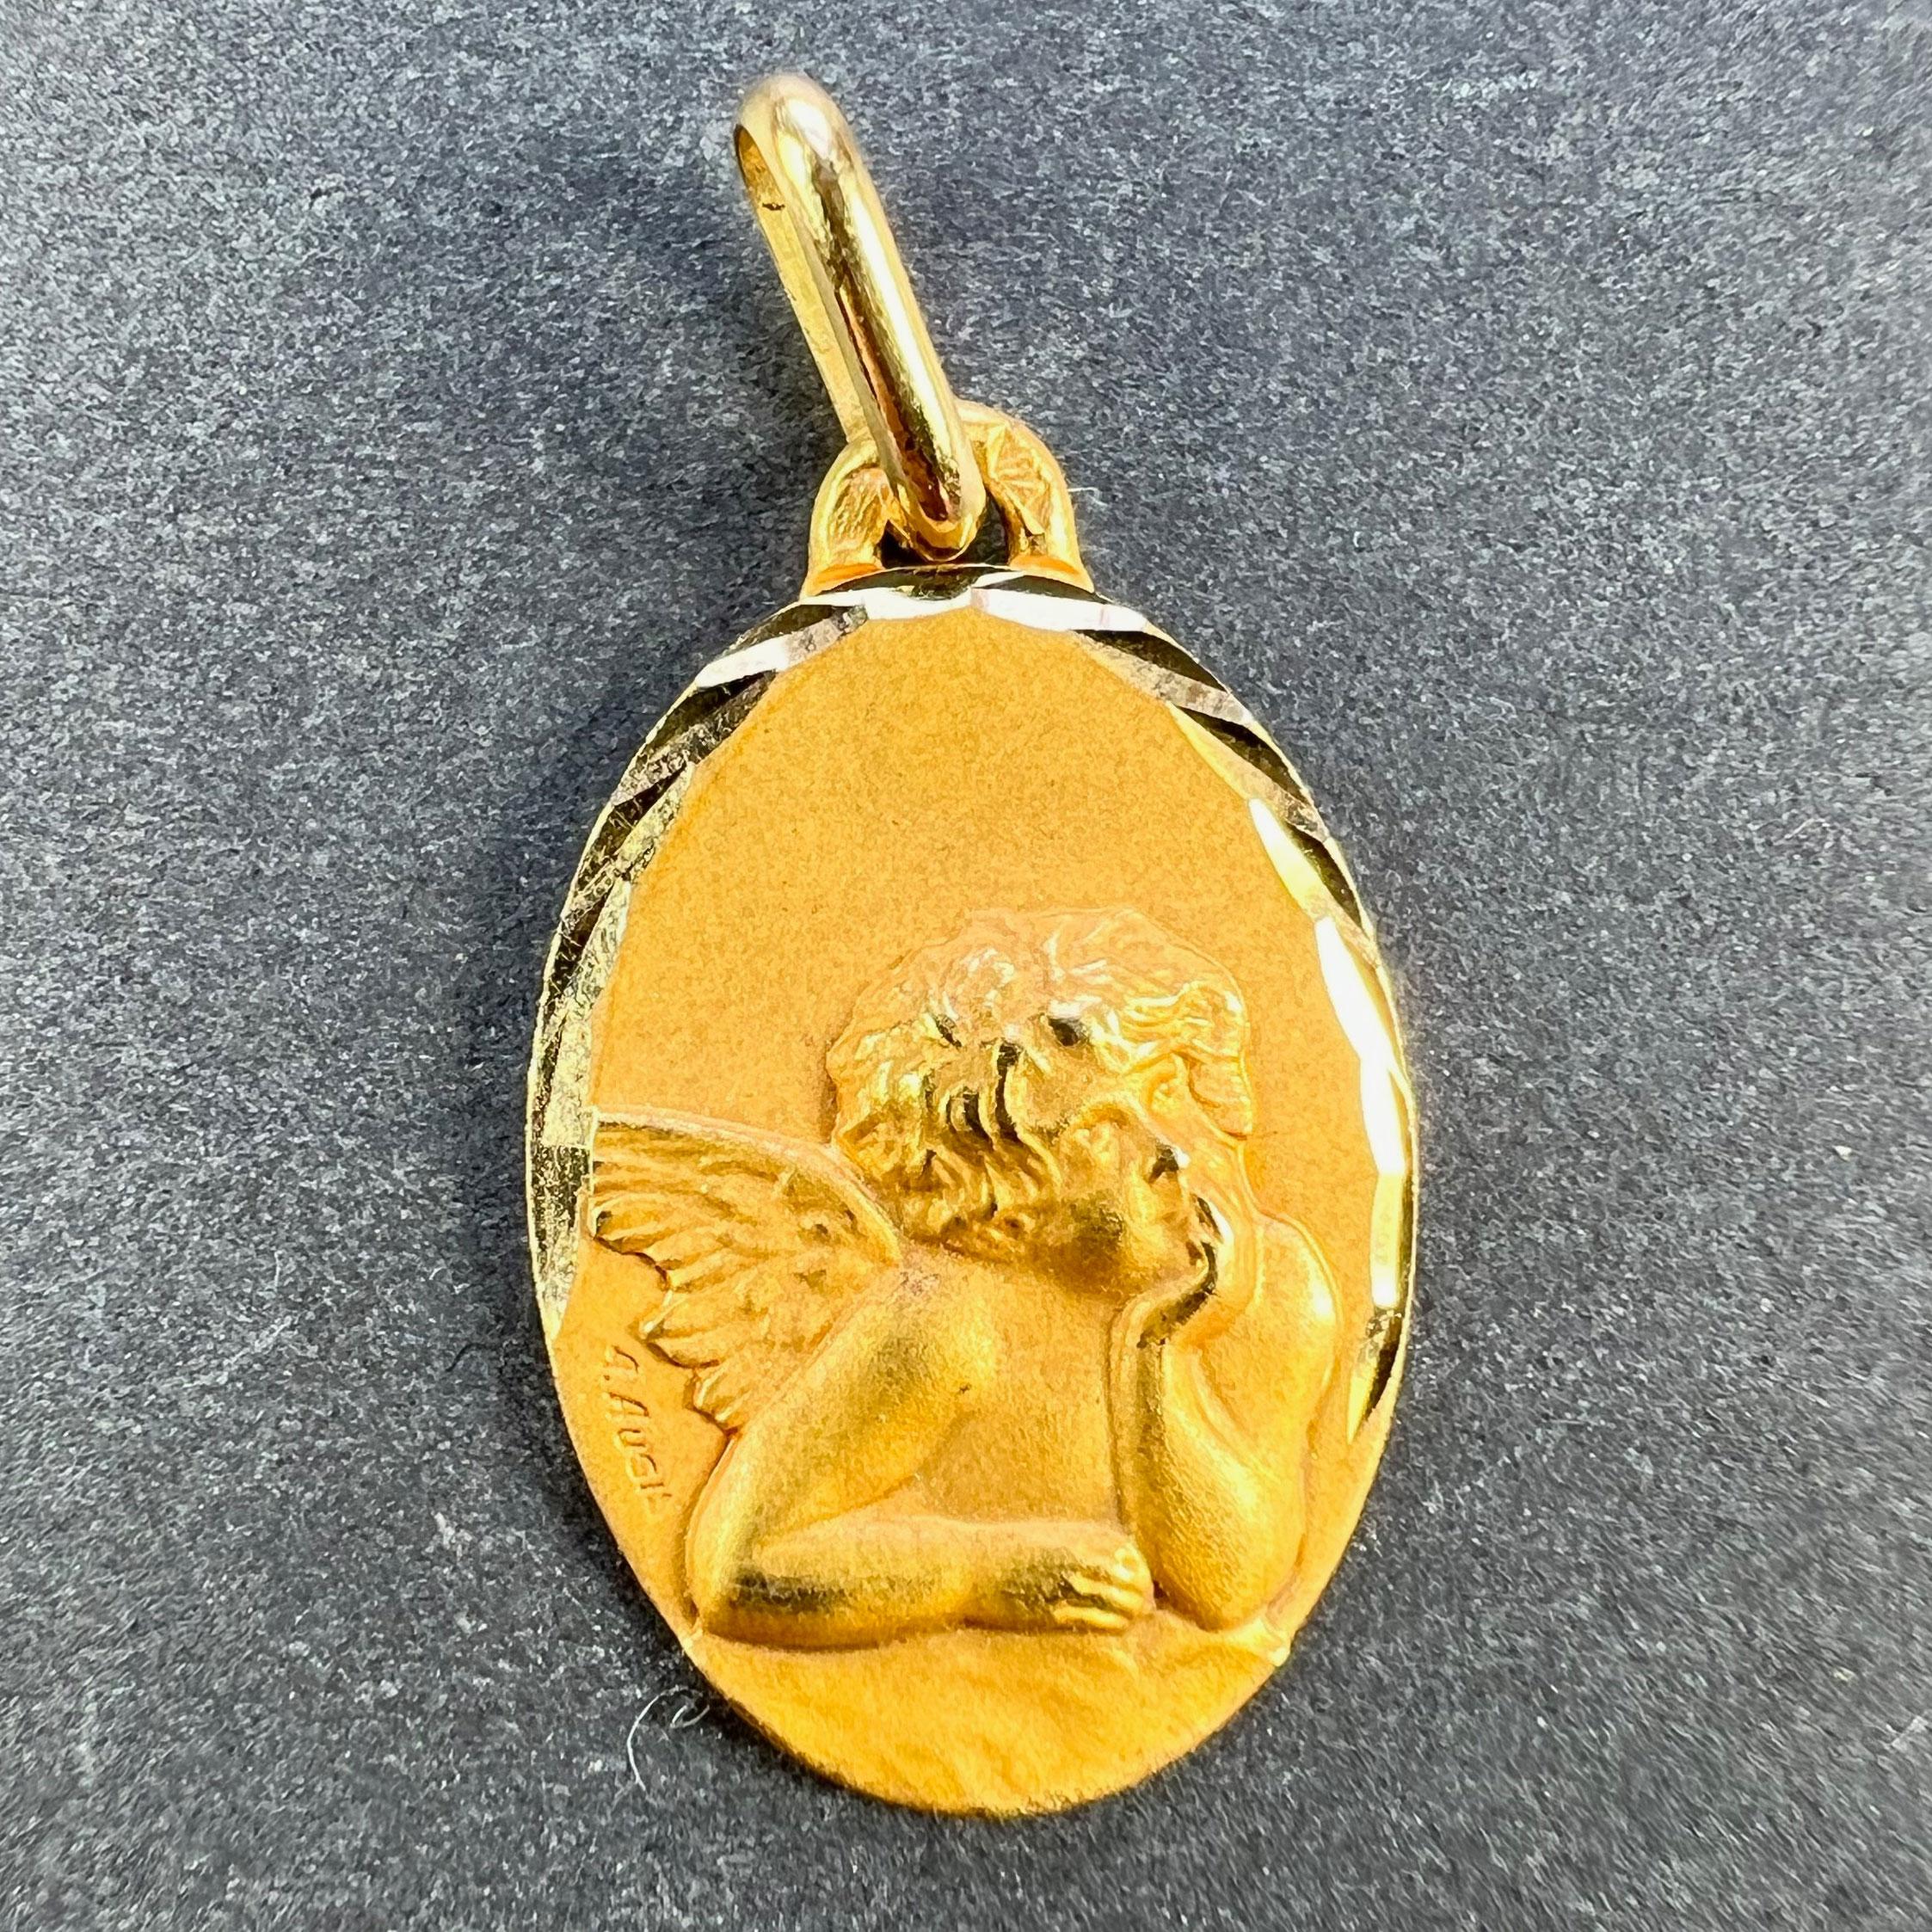 A French 18 karat (18K) yellow gold charm pendant designed as a oval medal depicting Raphael’s cherub. Signed A.Augis. Stamped with the eagle mark for 18 karat gold and French manufacture with an unknown maker's mark. The reverse marked A for